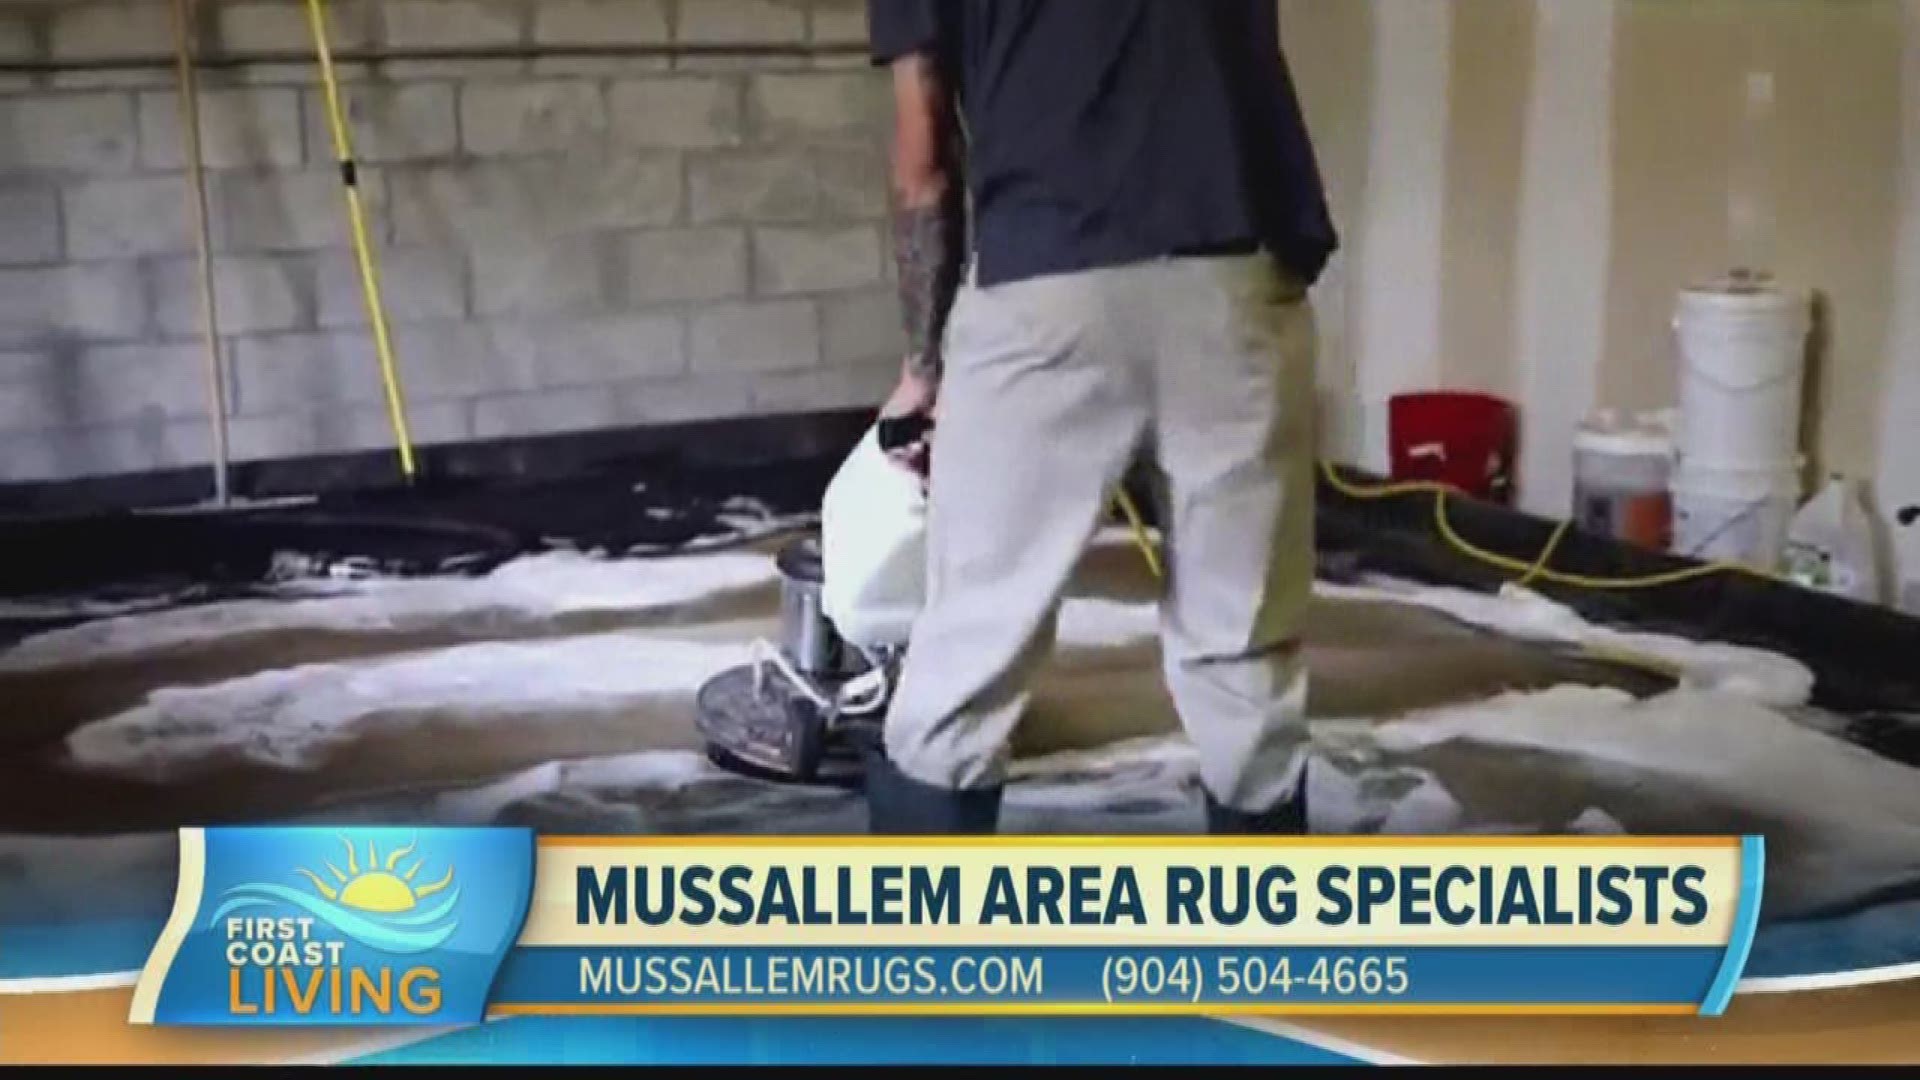 Get a first hand look at how you can clean and restore your rug with Mussallem Area Rug Specialists!